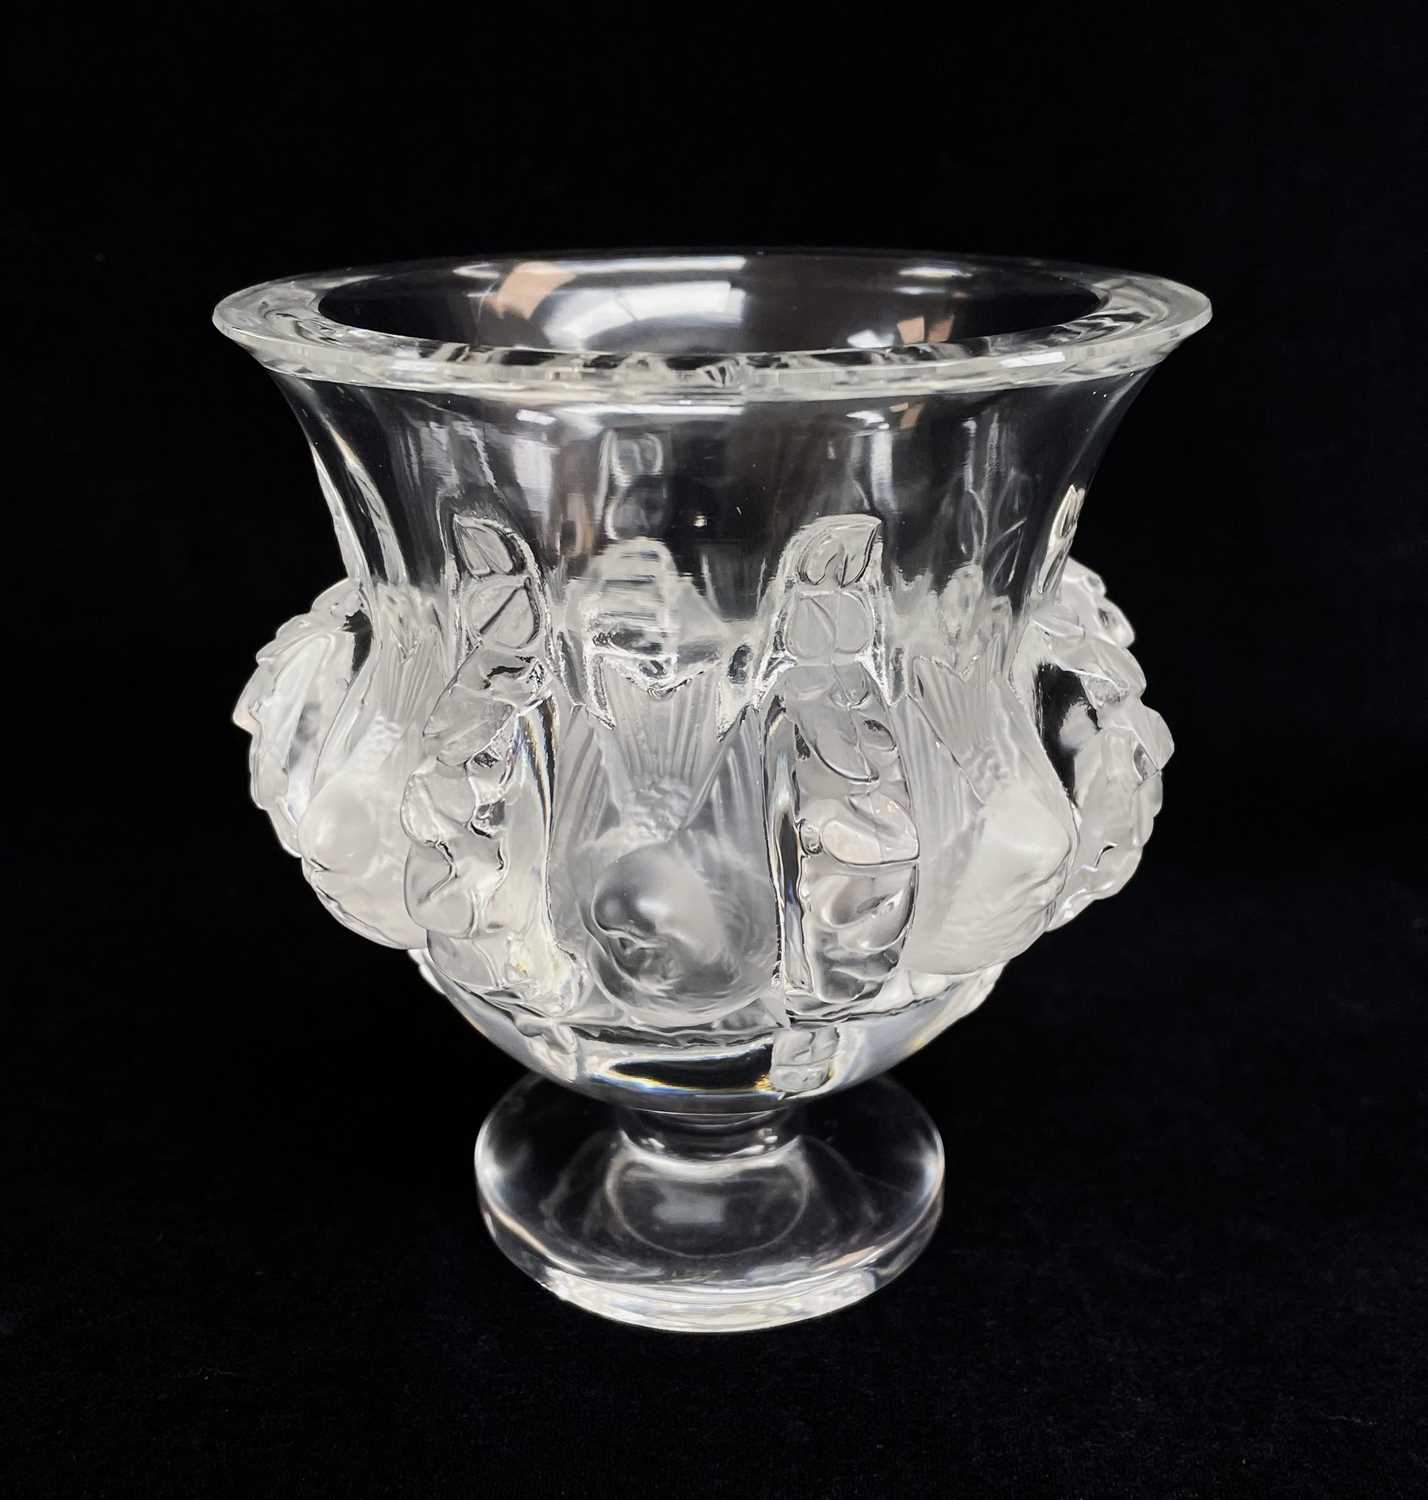 LALIQUE 'DAMPIERE' GLASS VASE, frosted and polished with birds and leaves, etched 'Lalique,